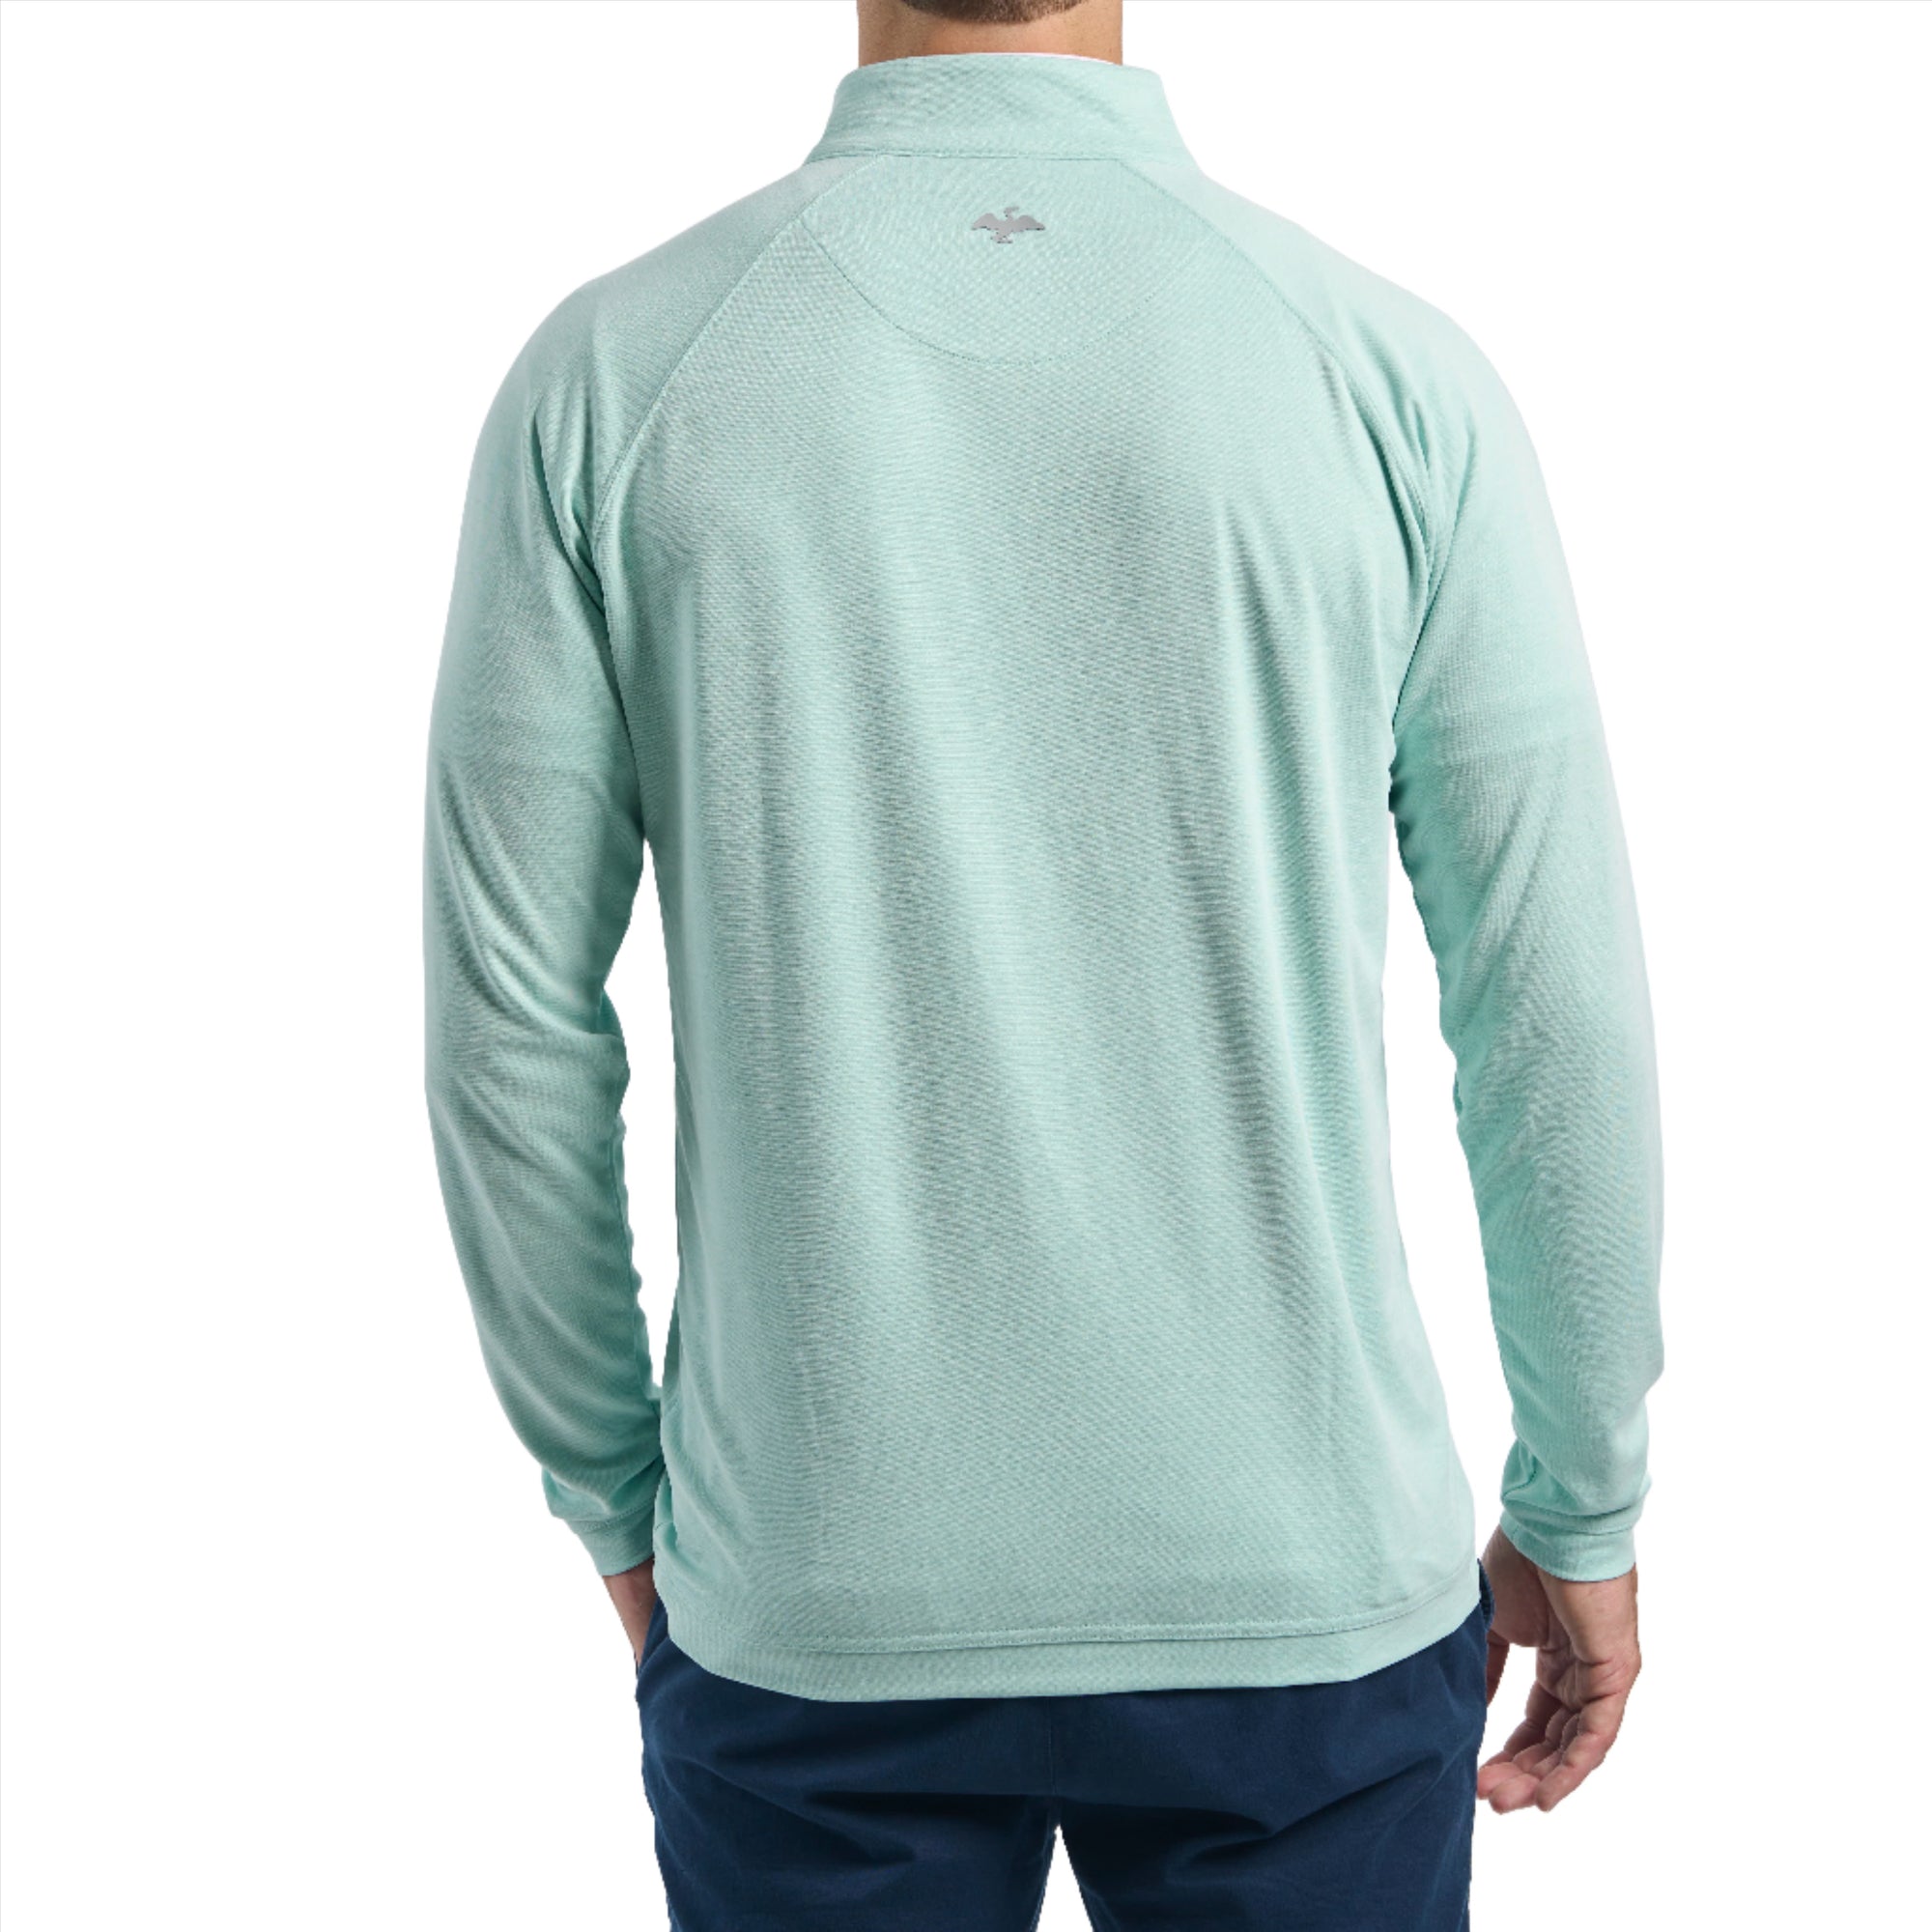 The Seaside Pullover